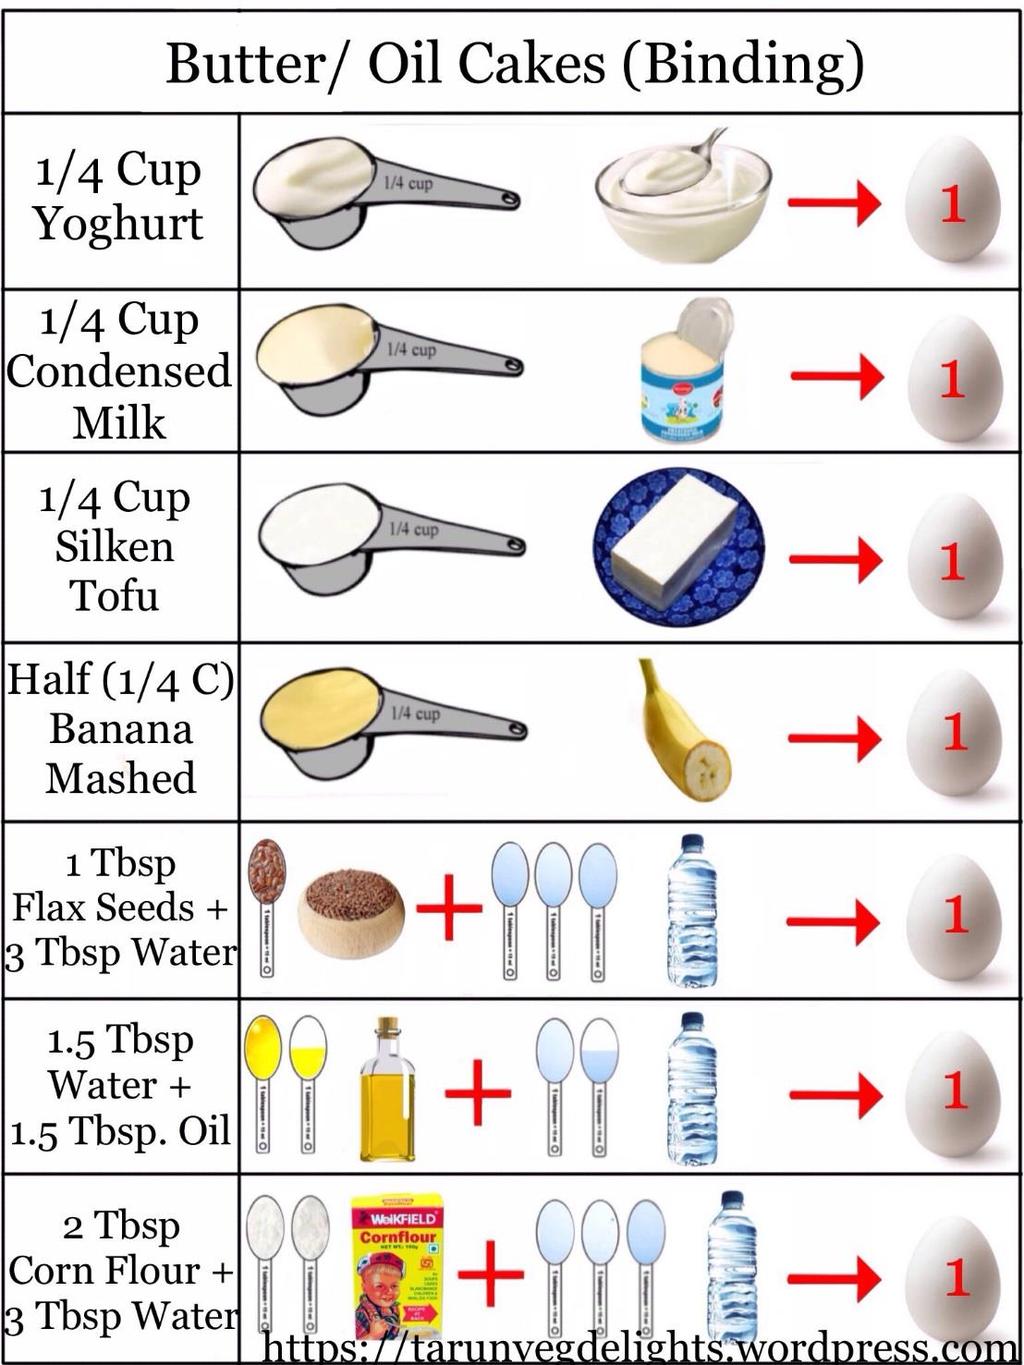 Alternative ingredients For students that are allergic to eggs, please see ingredient ideas below If you know how to adapt these ingredients otherwise, then please follow what you already know/use at